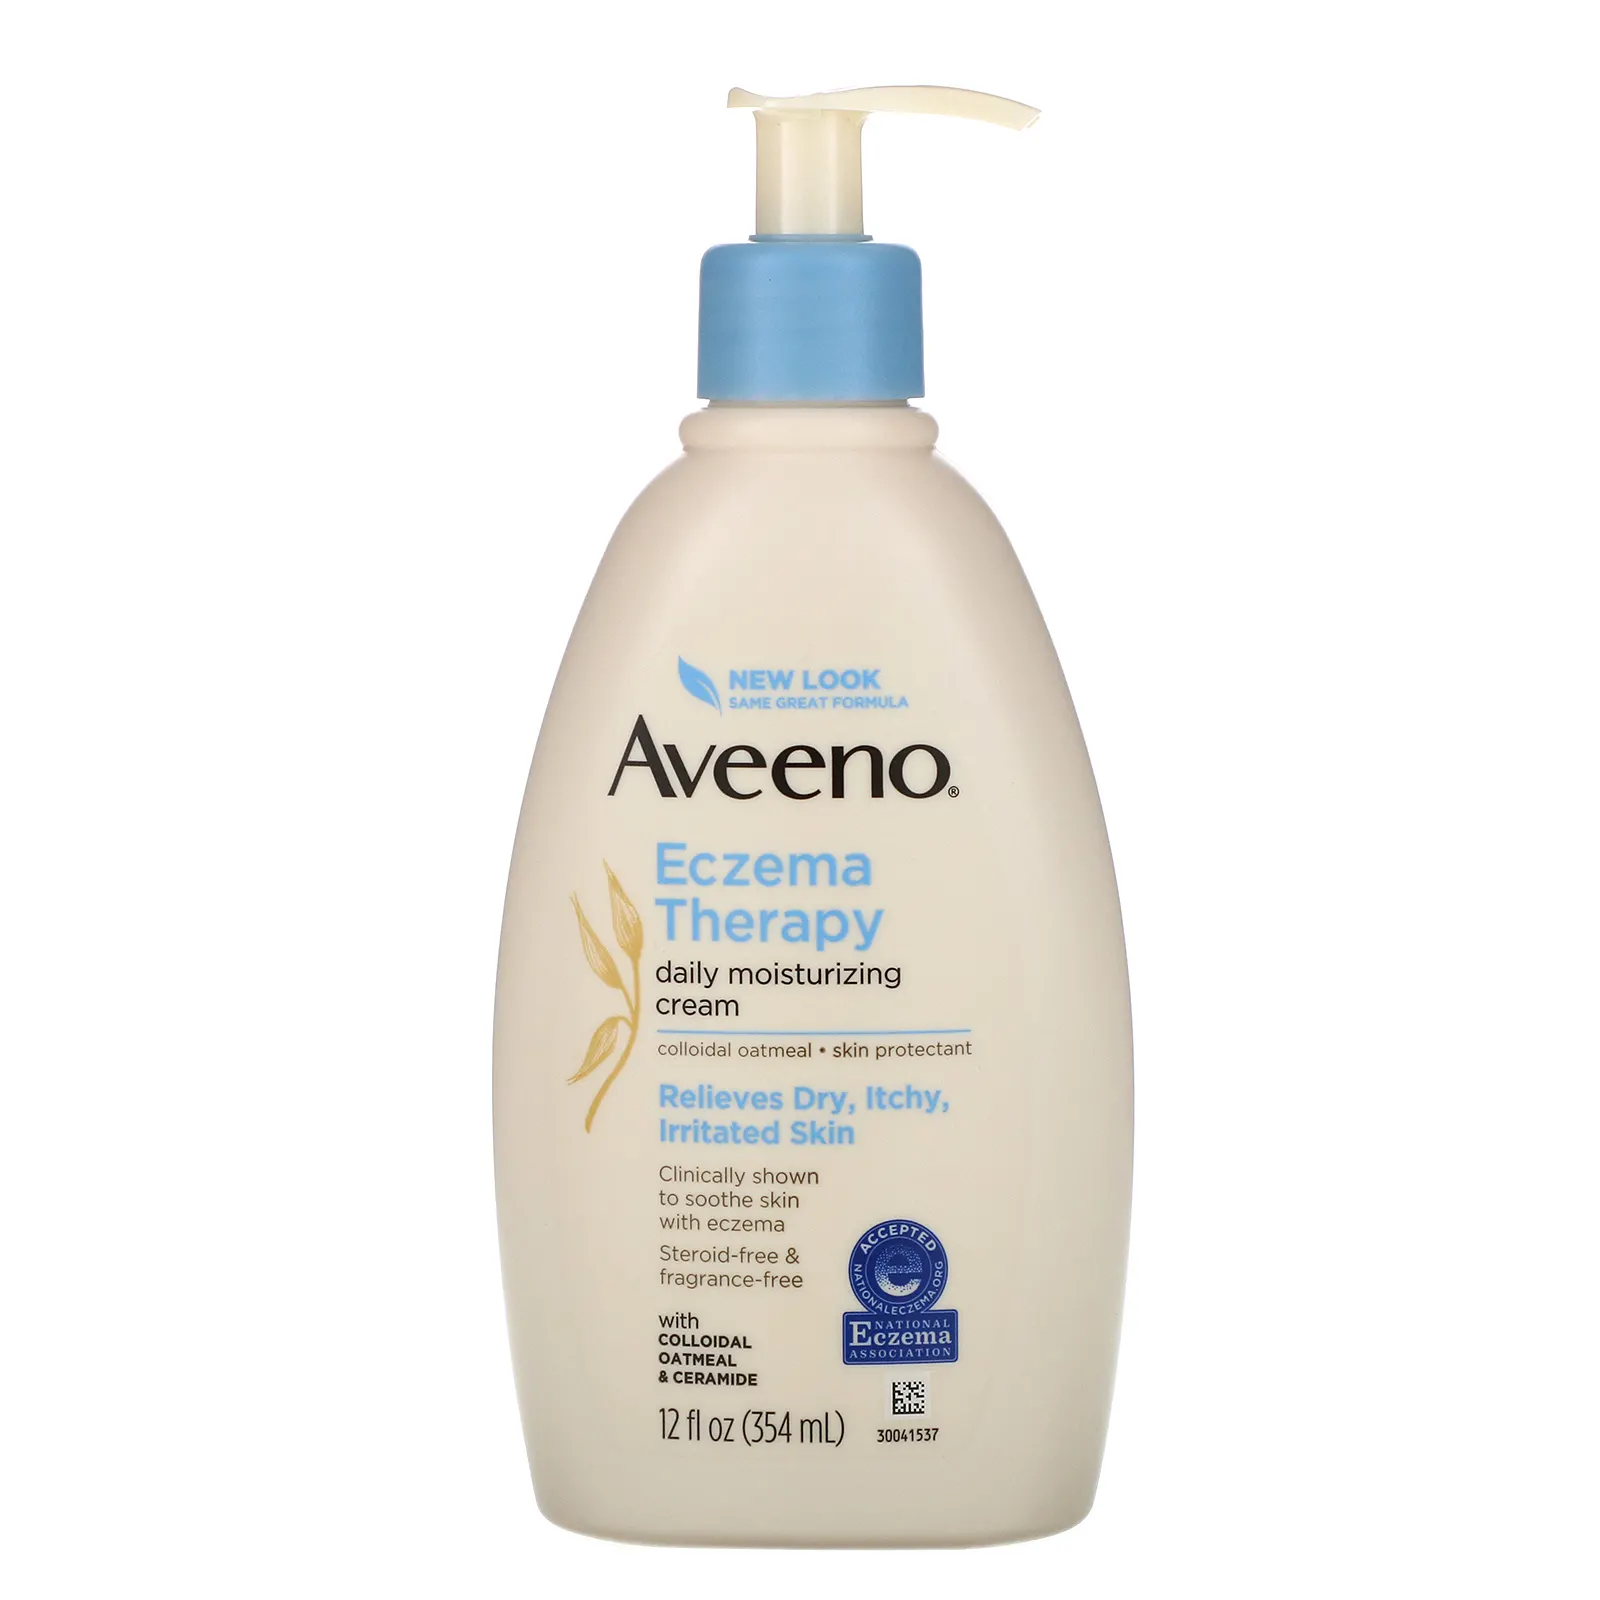 Eczema Therapy Daily Moisturizing Cream by Aveeno, clinically shown to help reduce the itching and irritation of eczema.